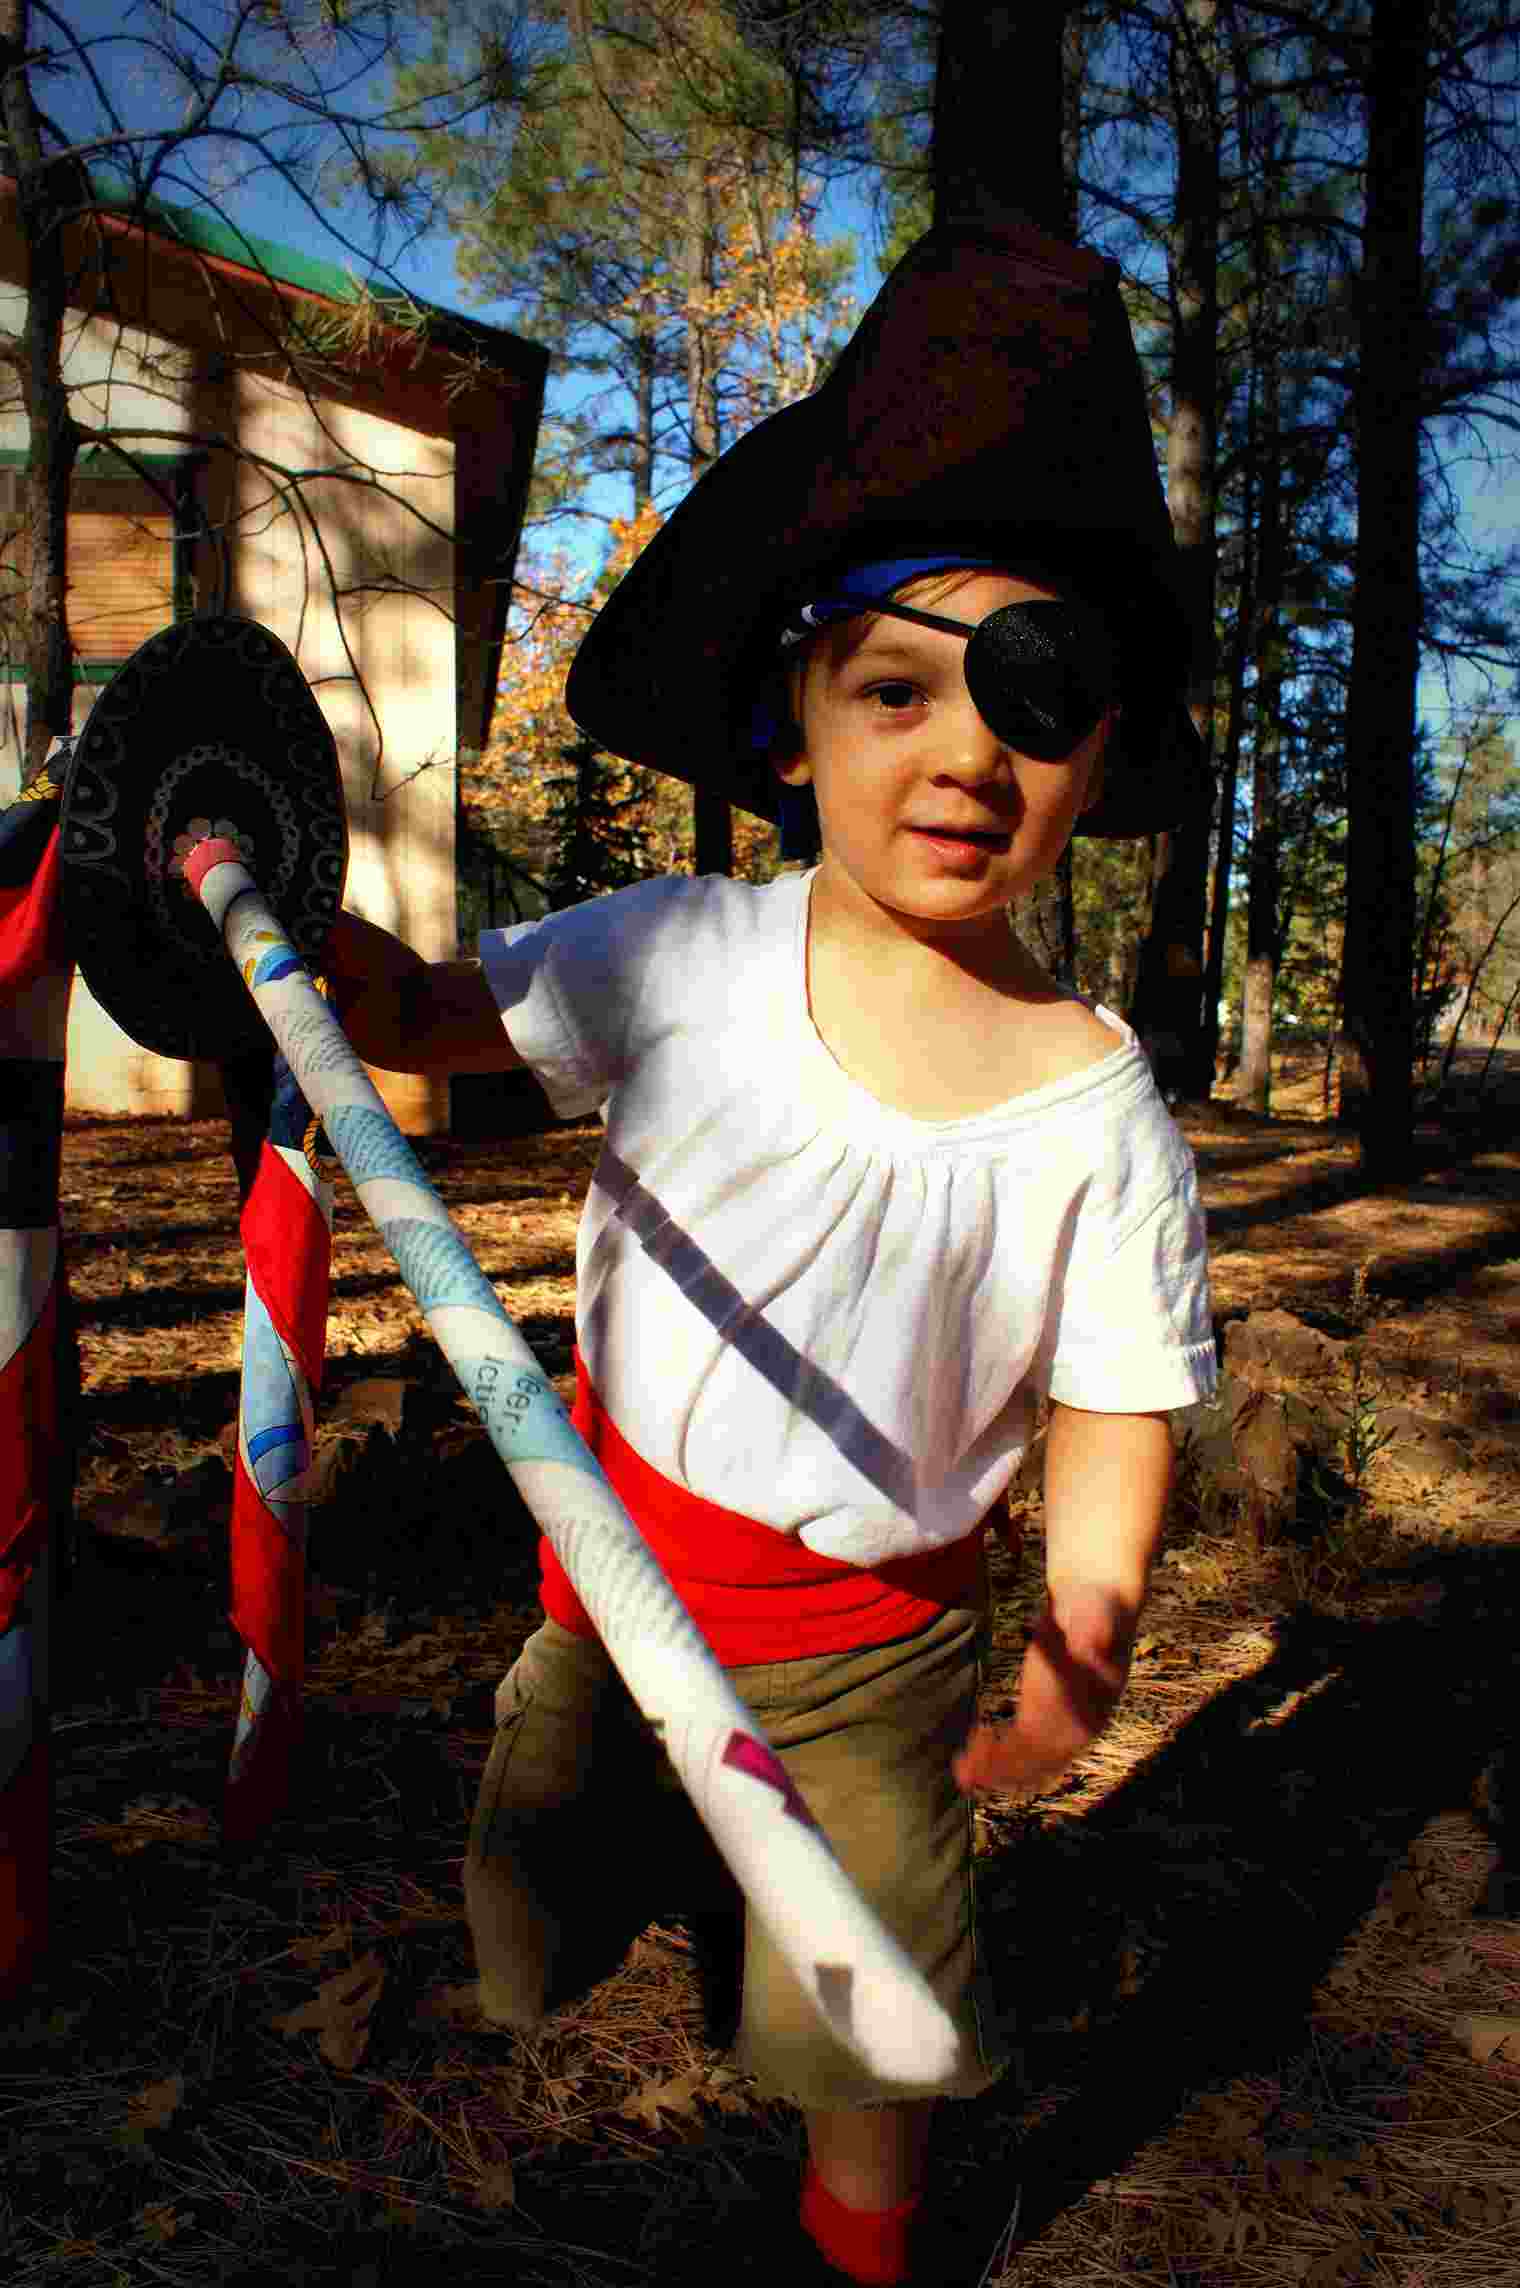 Pirate costume for kids just make carnival costume for kids